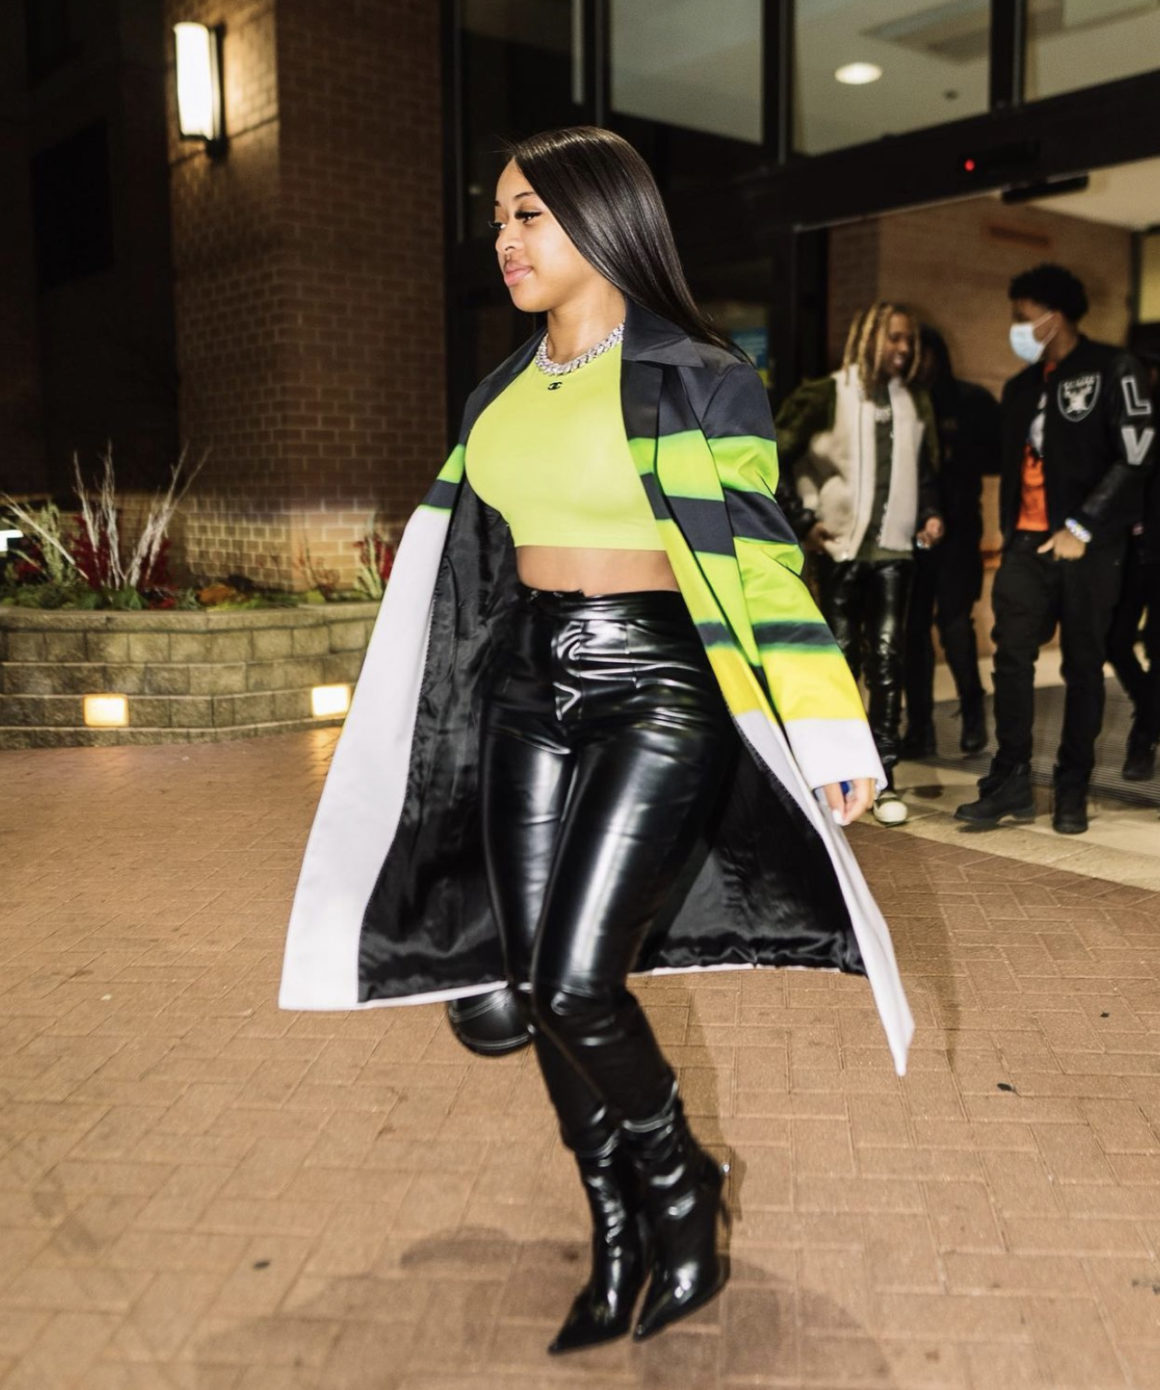 India Royale Steps Out in Neon Green and Black Look Featuring Fashion Nova Black Leather Pants2